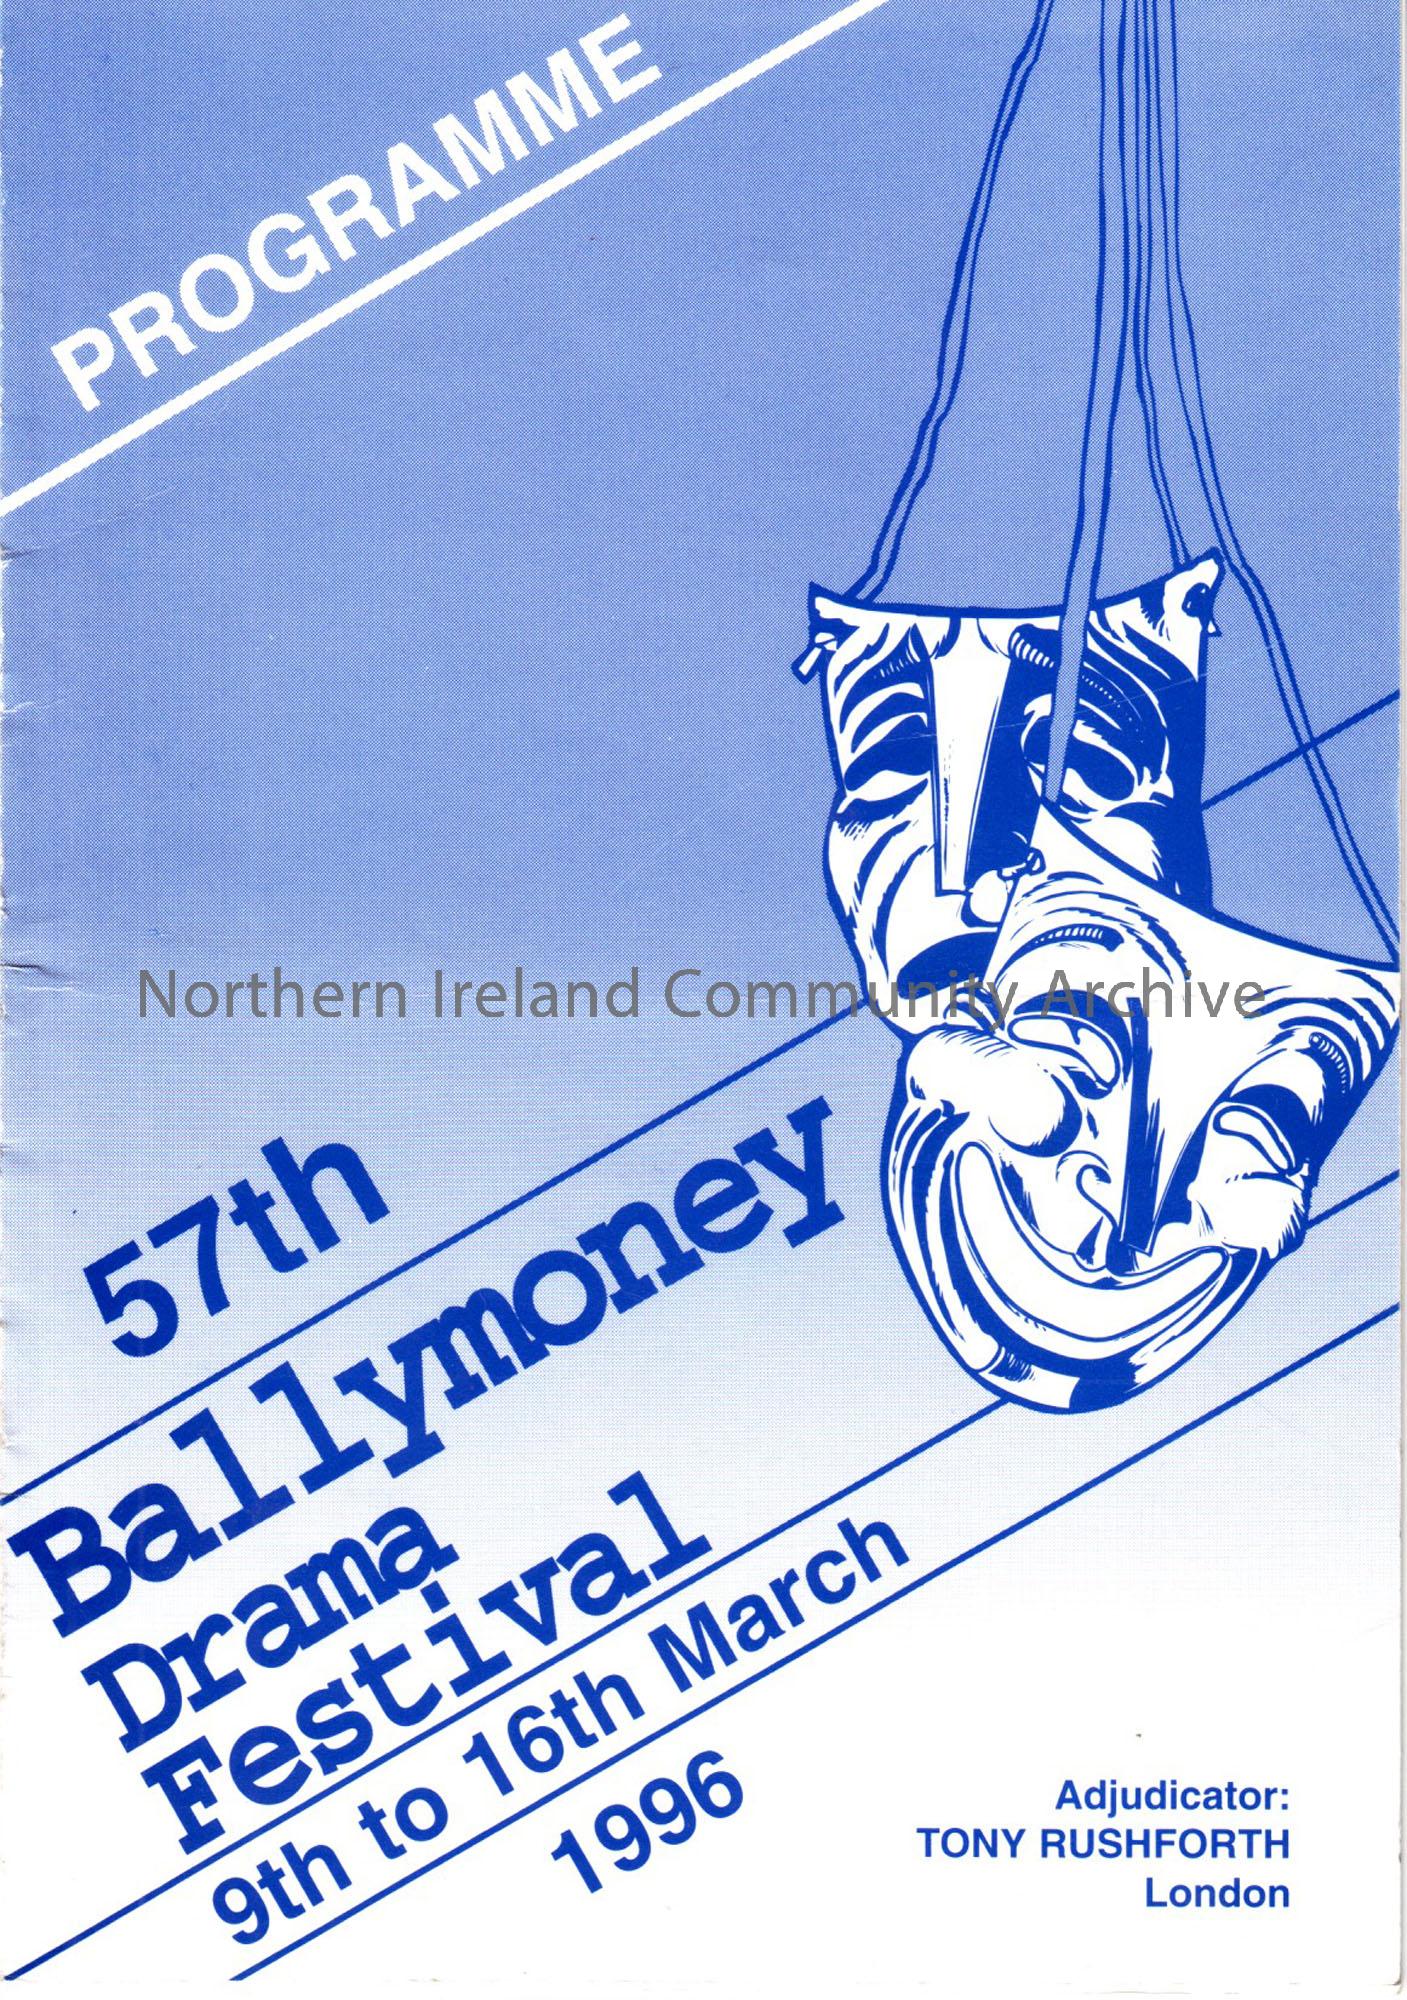 Programme of 57th Ballymoney Drama Festival,1996 9th to 16th March